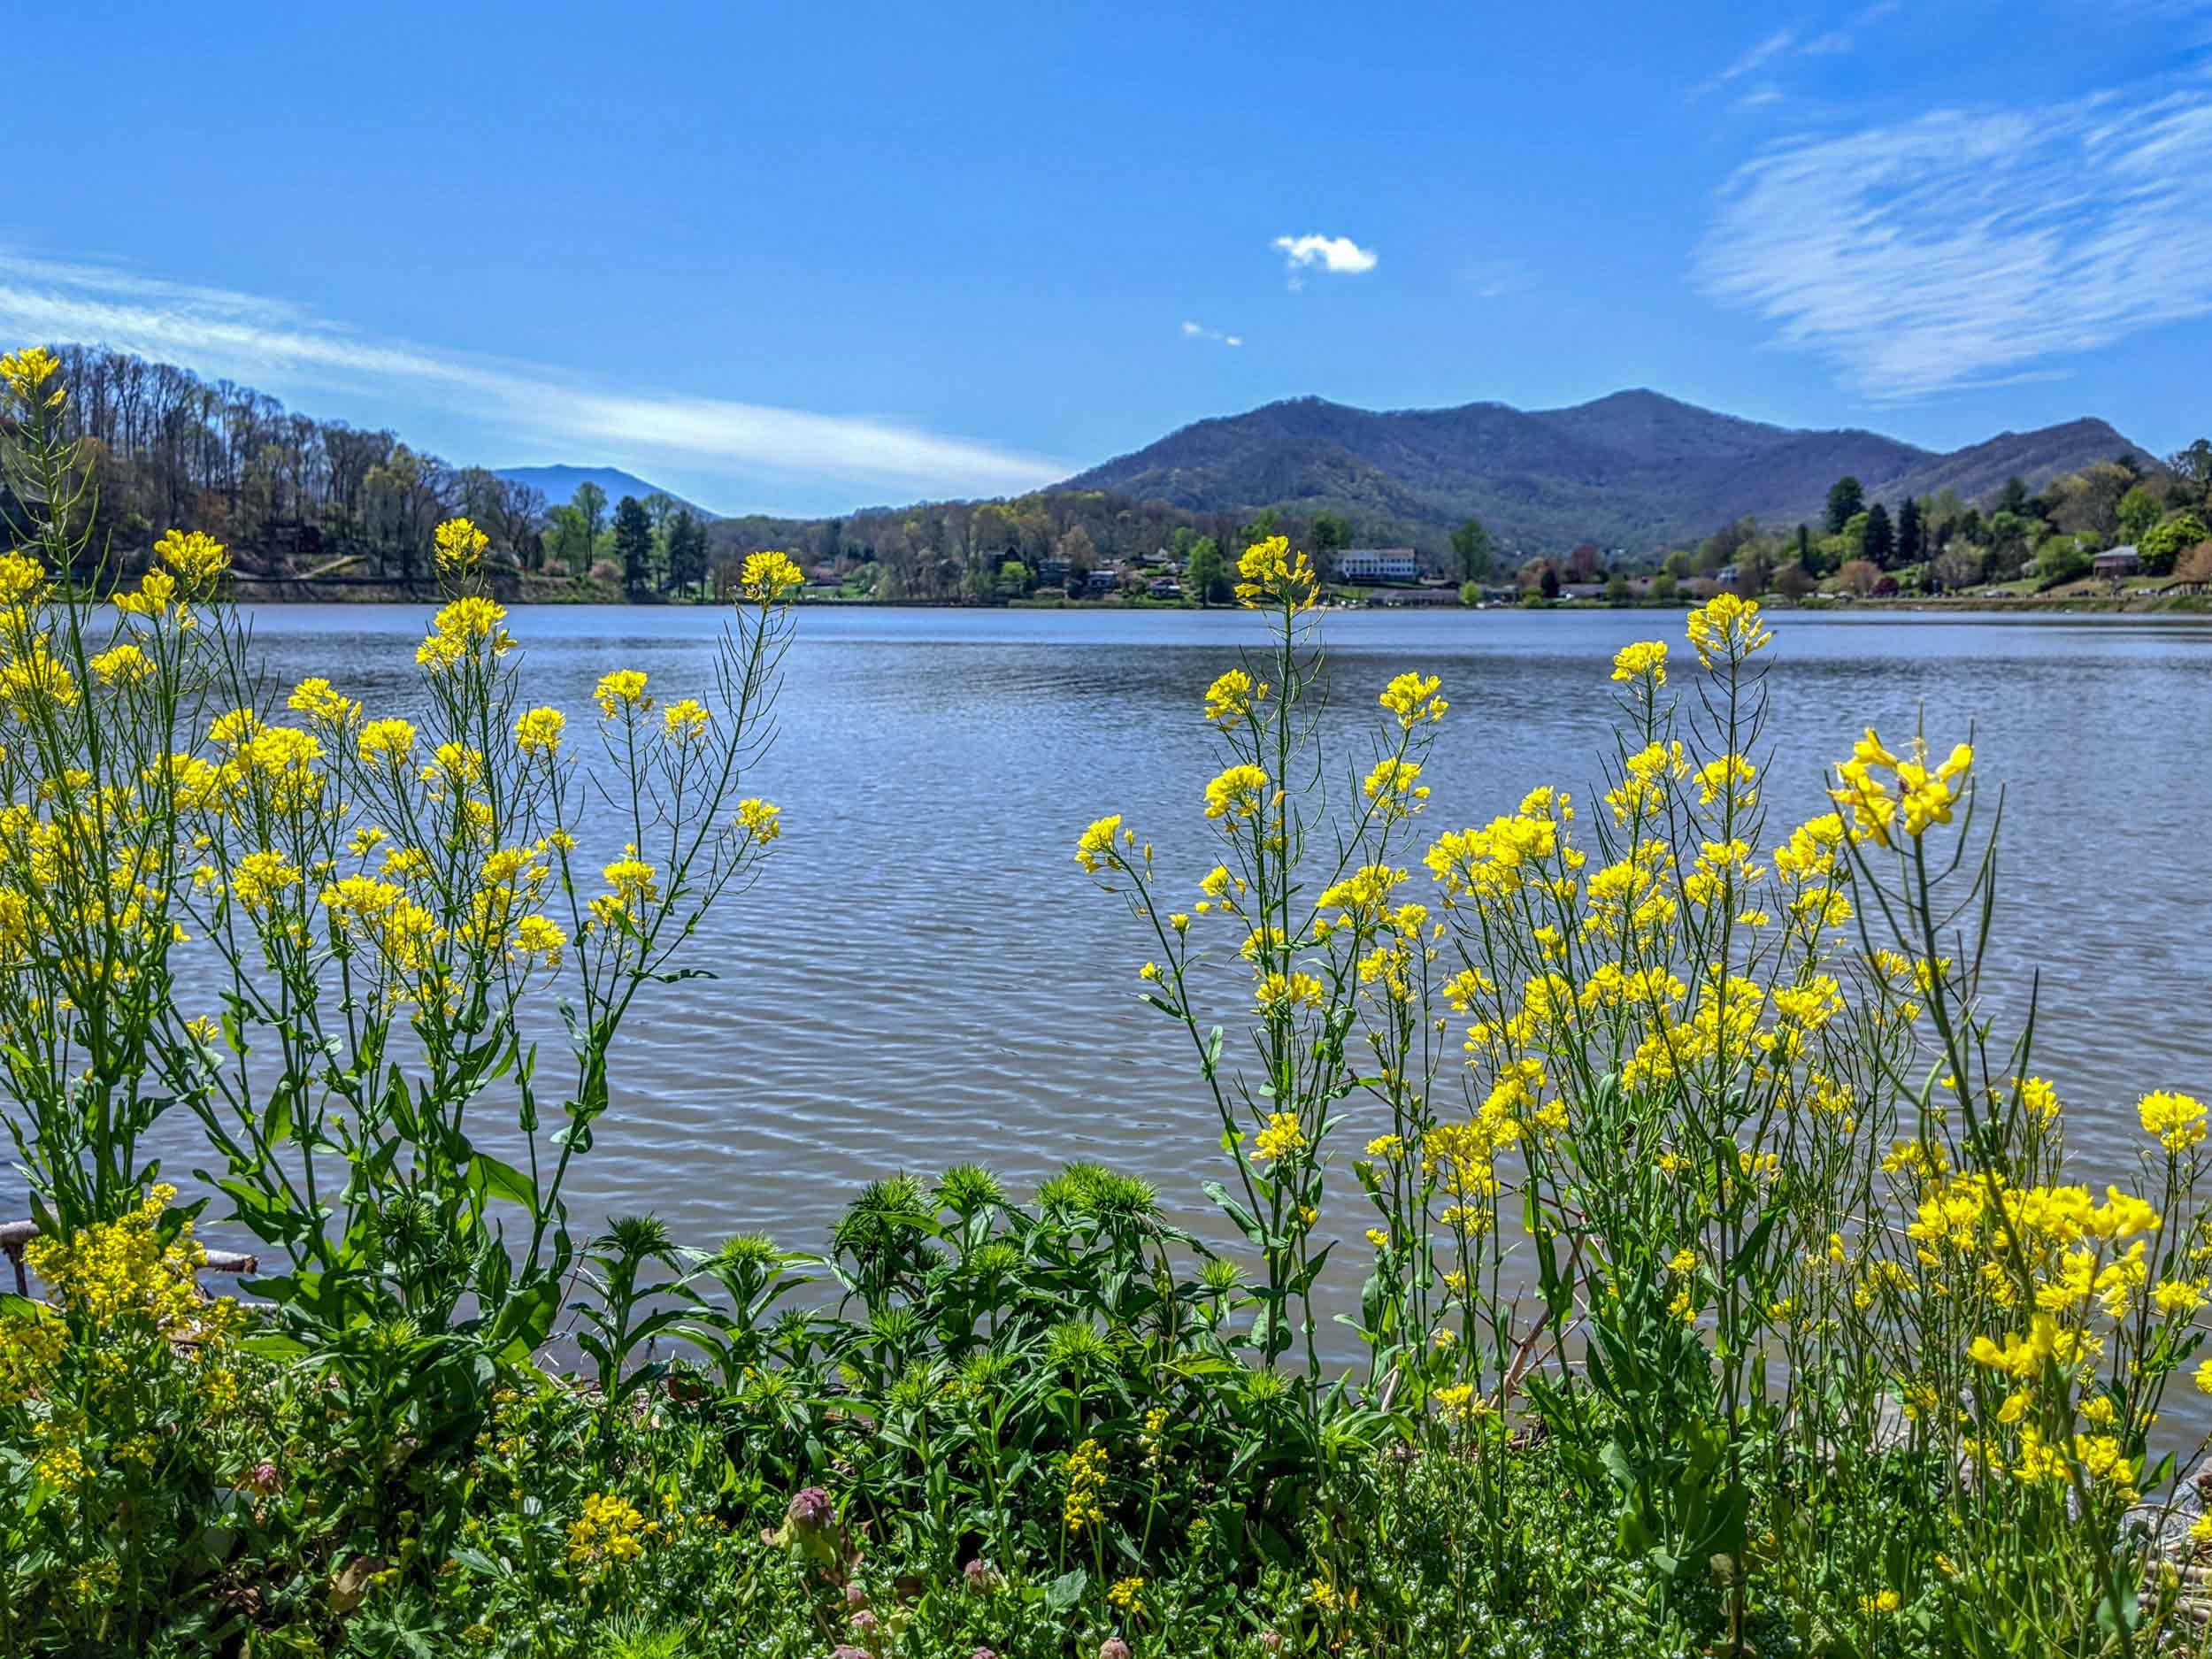 Scenic photo of yellow flowers growing by the shore of Lake Junaluska